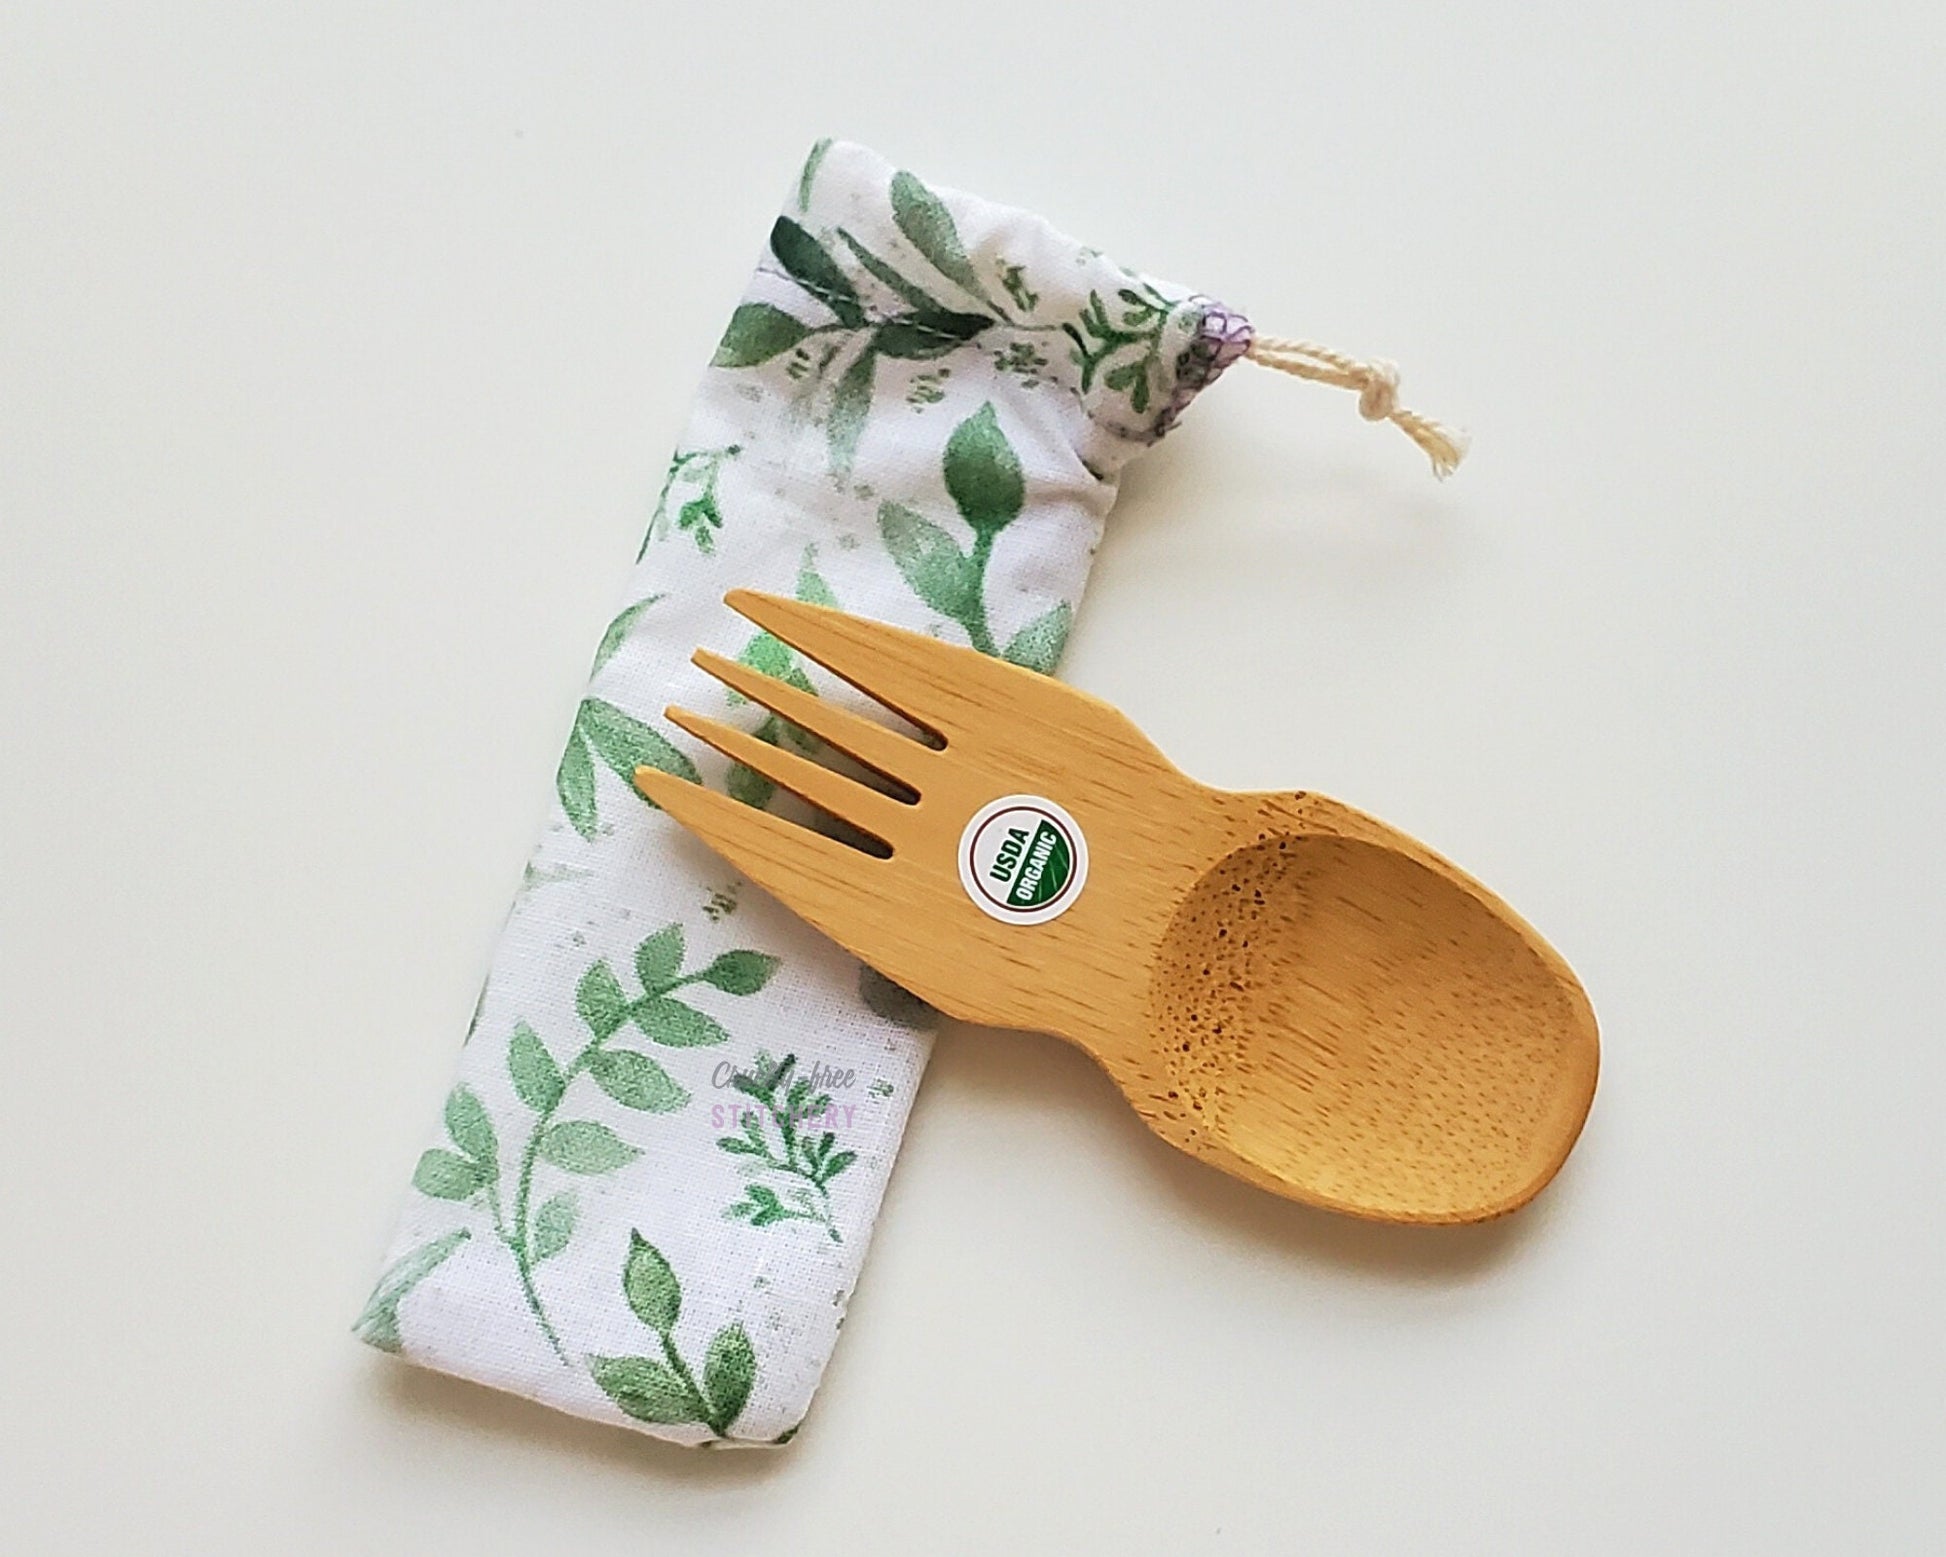 Reusable bamboo spork with pouch. The pouch is a white fabric with green eucalyptus leaves and vines. The pouch is sitting diagonally with the spork partially on top pointing the other way. The spork is small, a double ended fork and spoon.